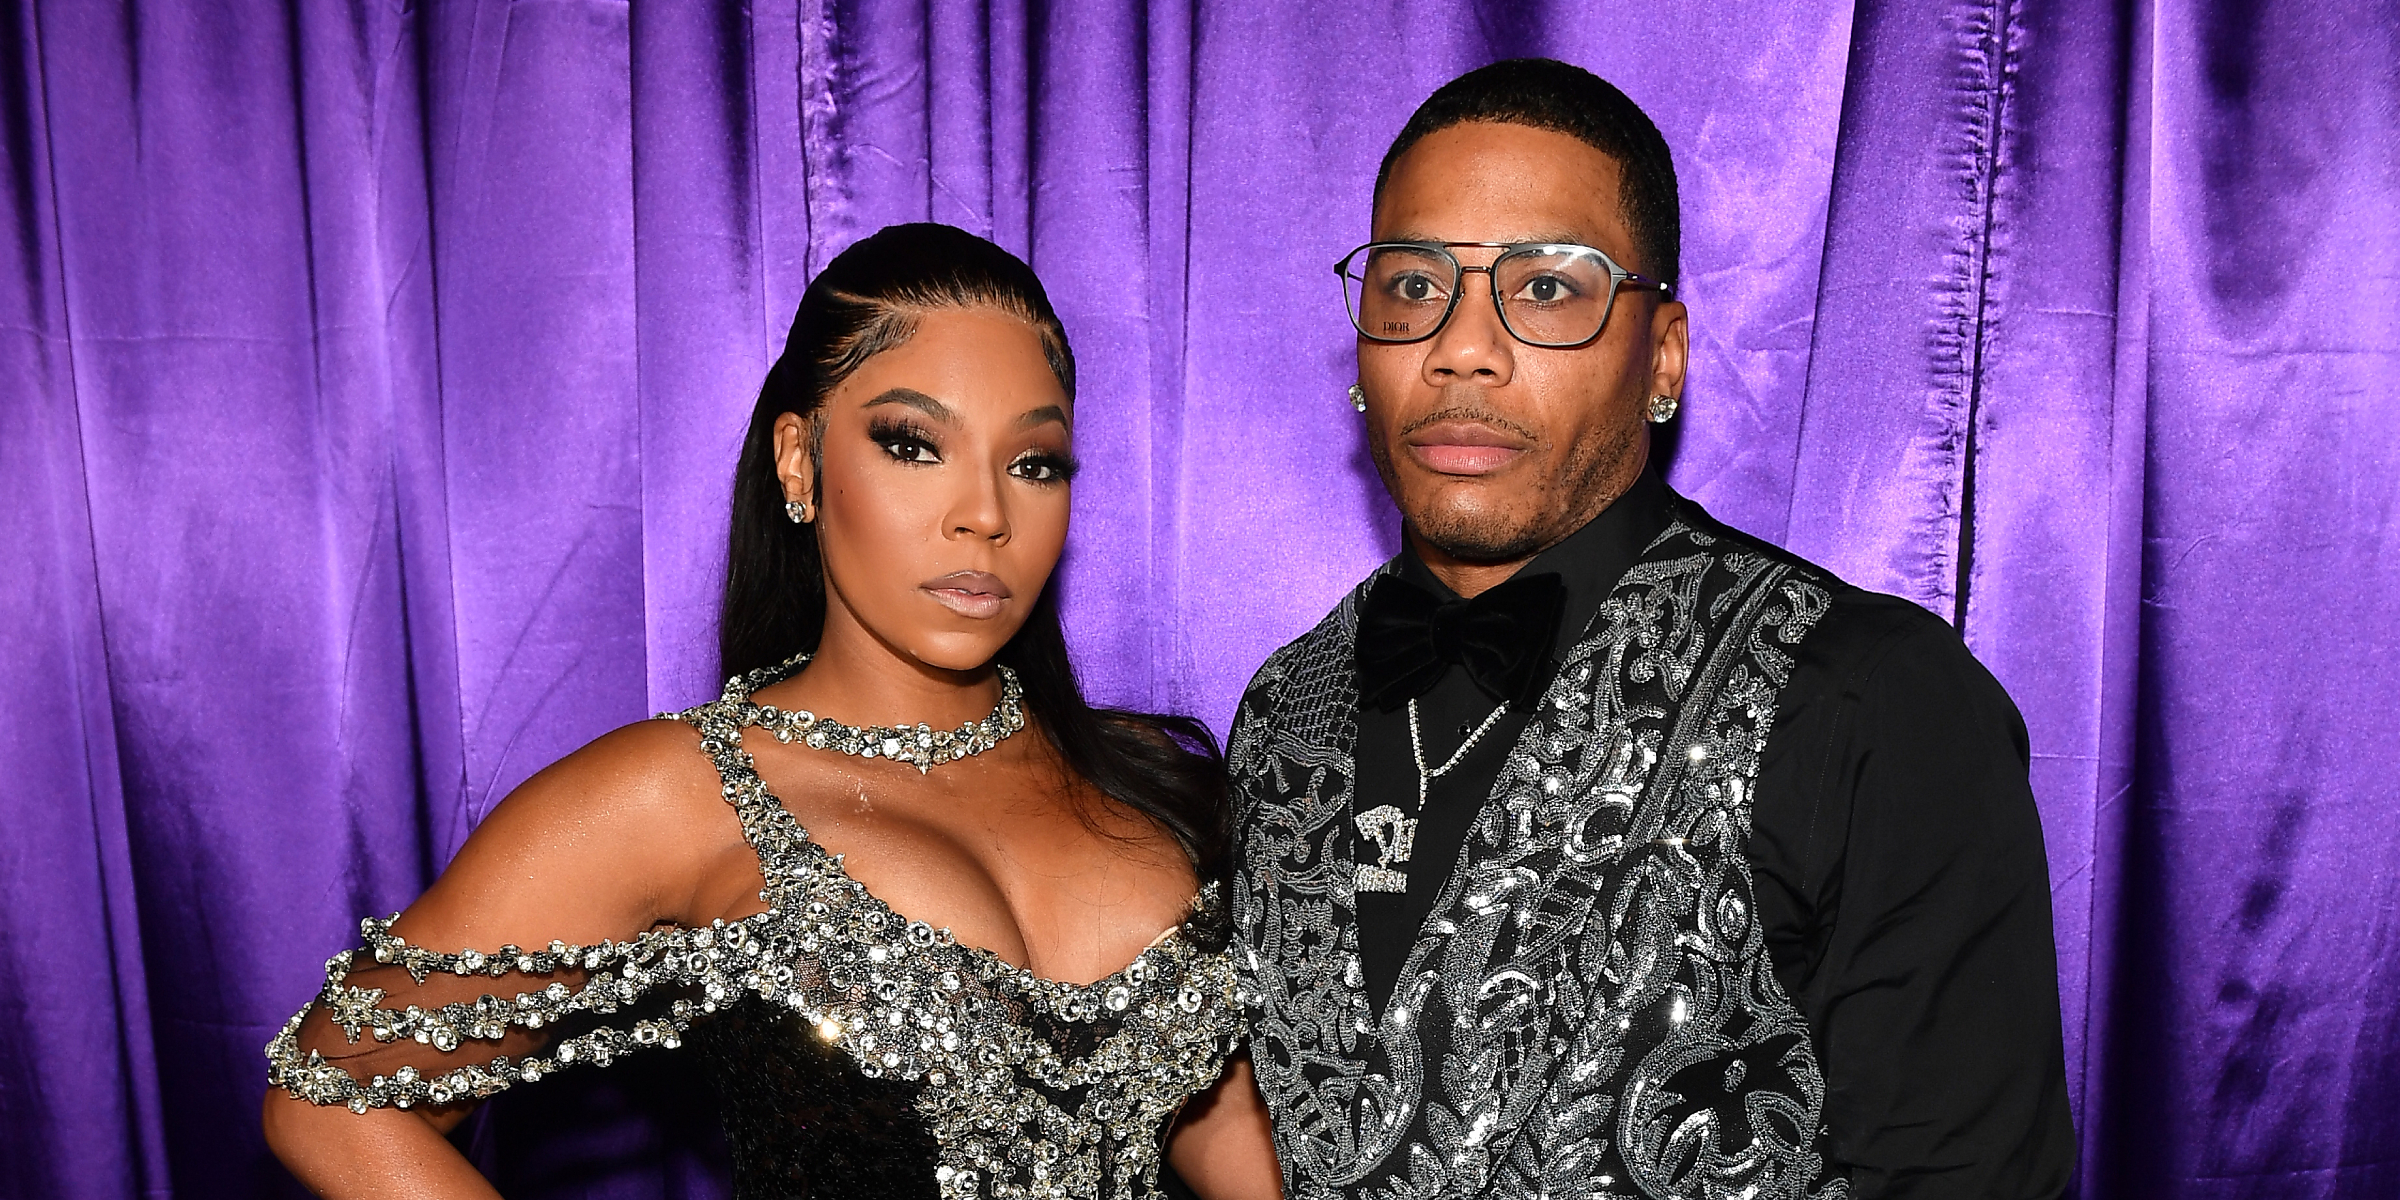 Ashanti and Nelly | Source: Getty Images